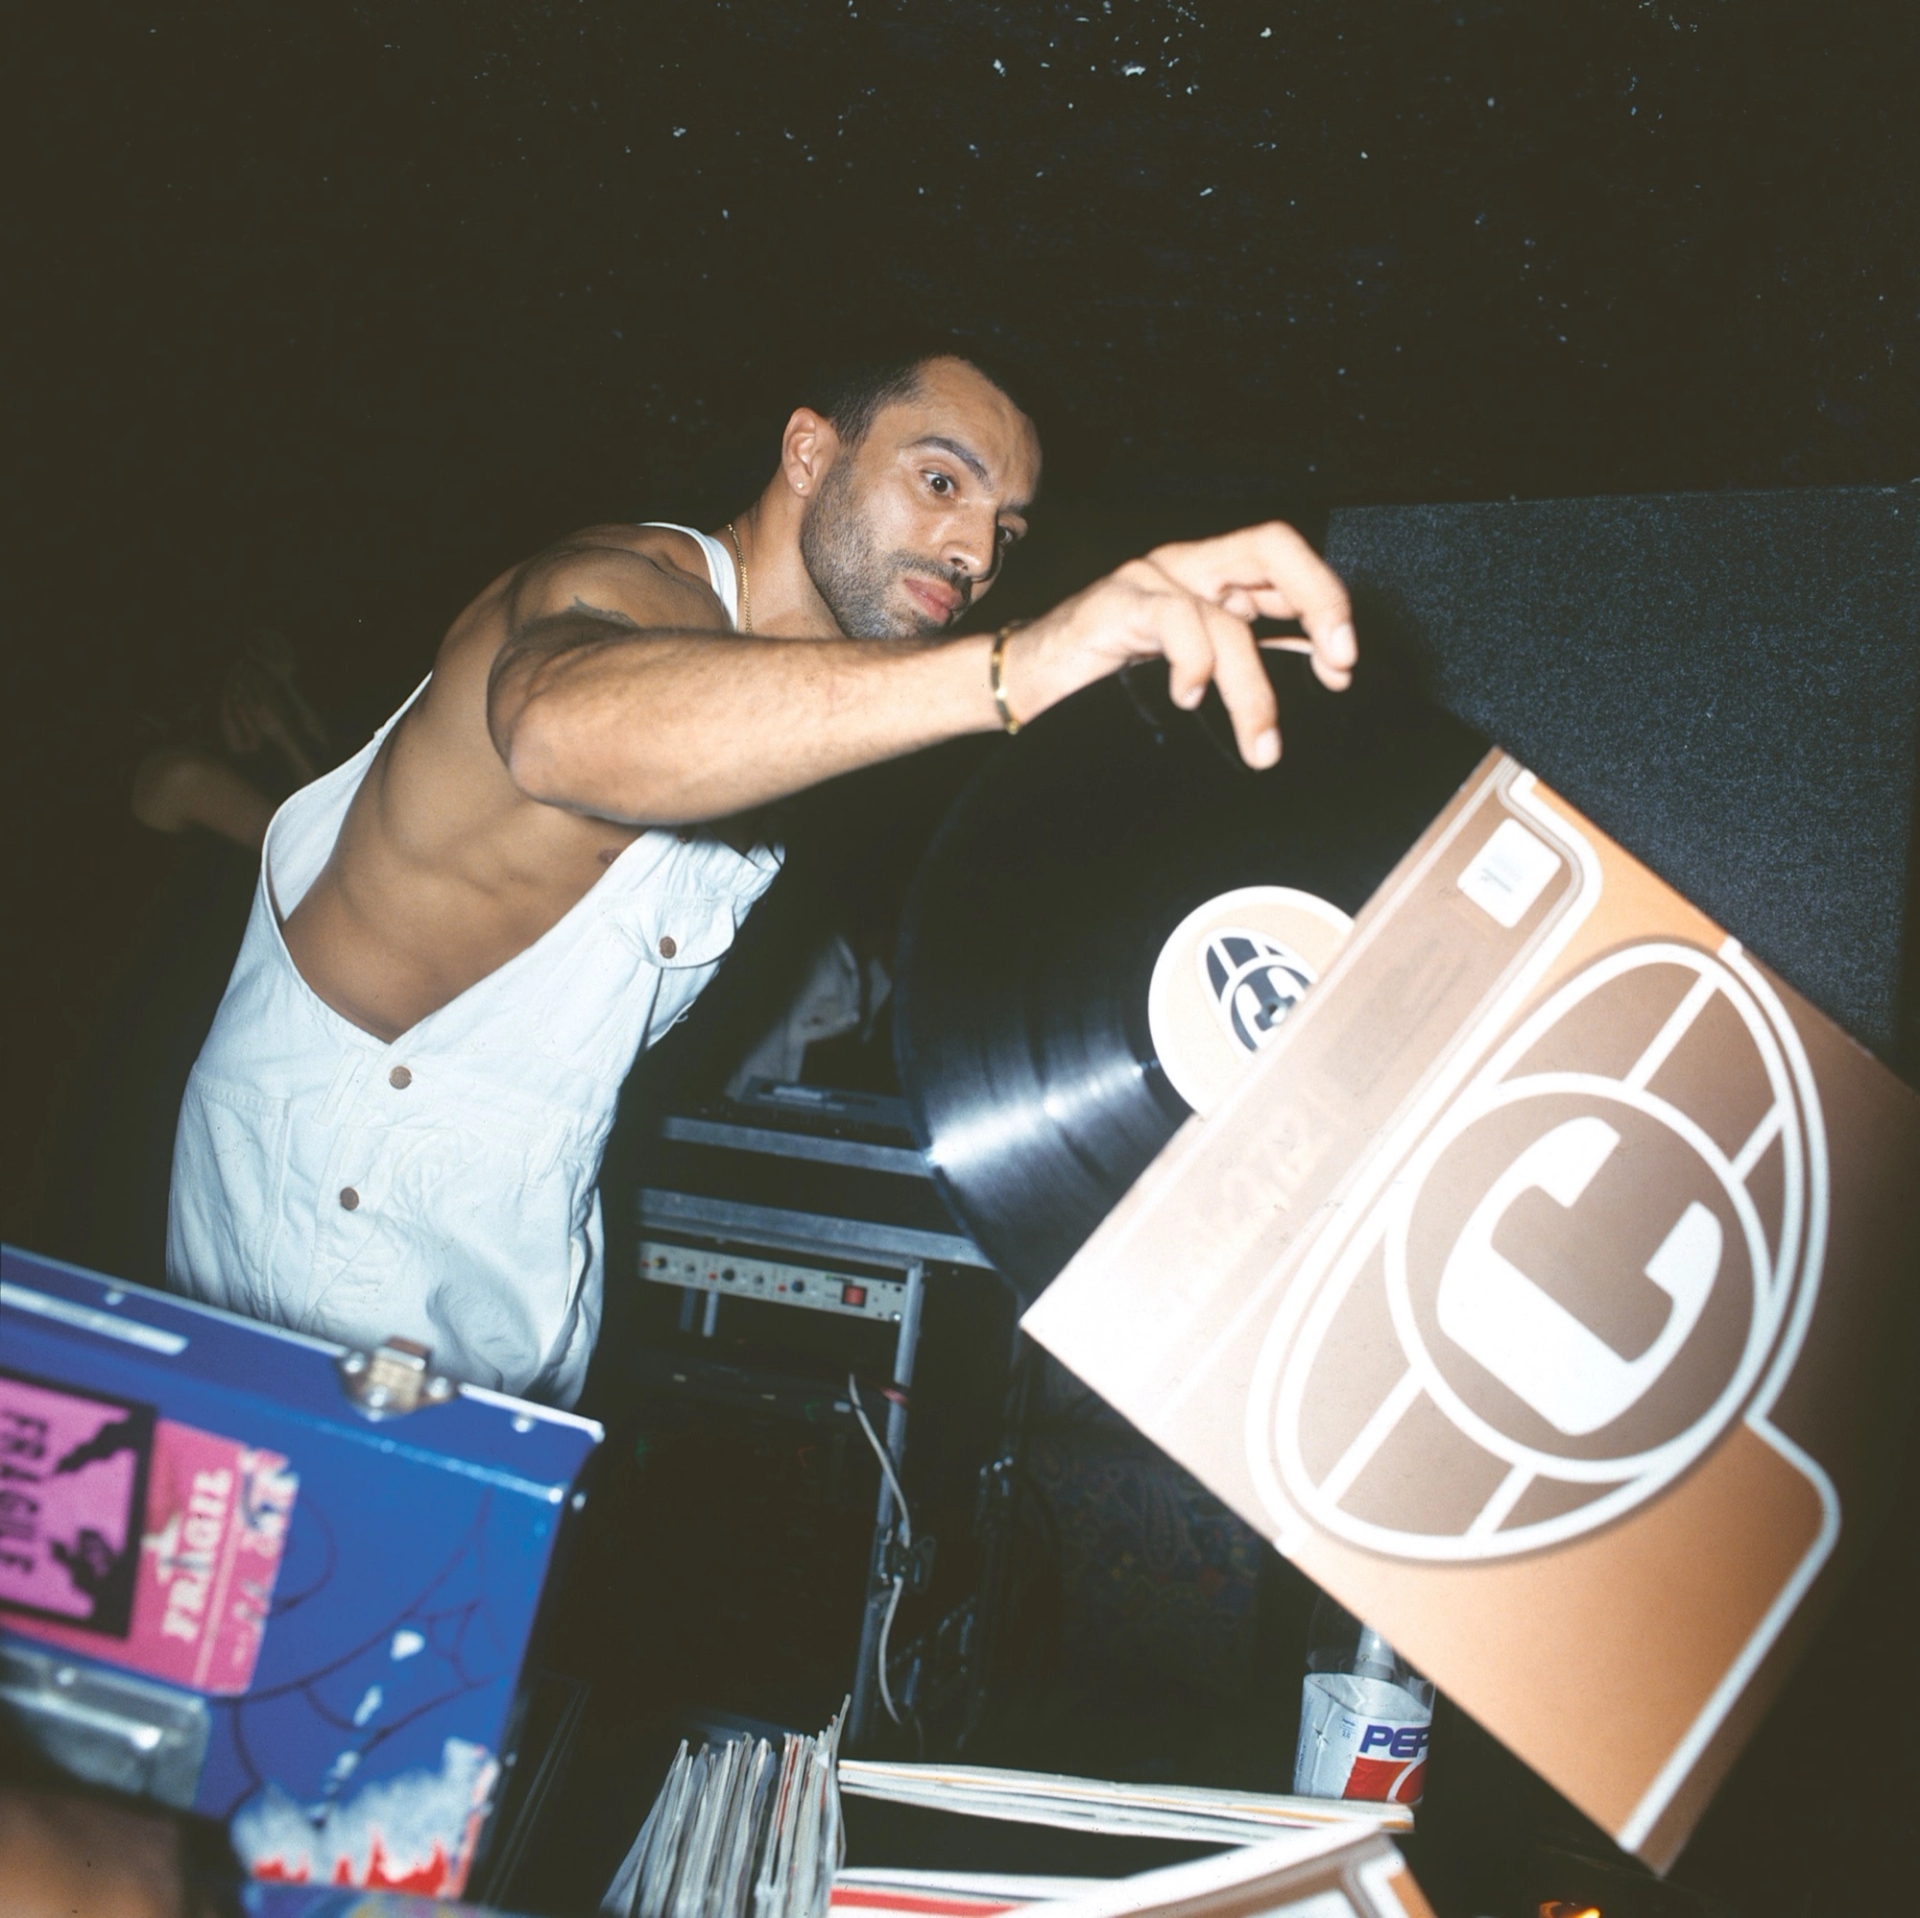 Dave Morales playing at My Way club, Naples, 1992, photo: Giovanni Calemma @calemma.g